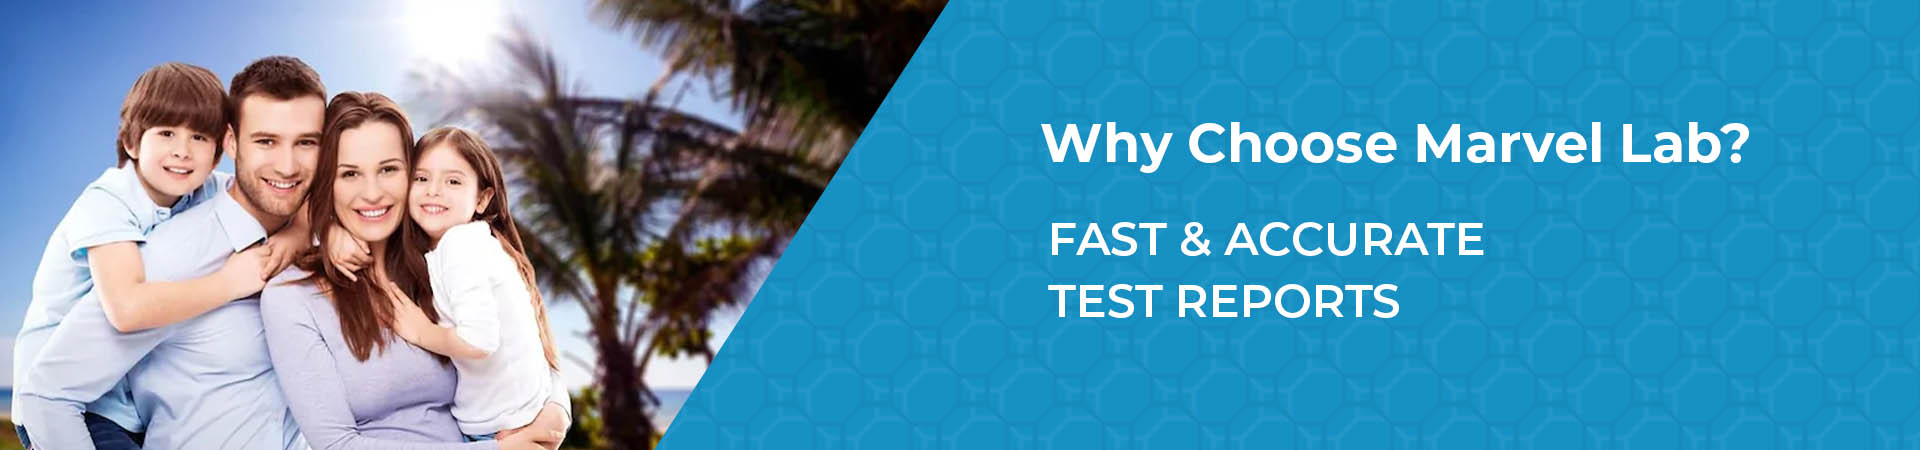 FAST & ACCURATE TEST REPORTS